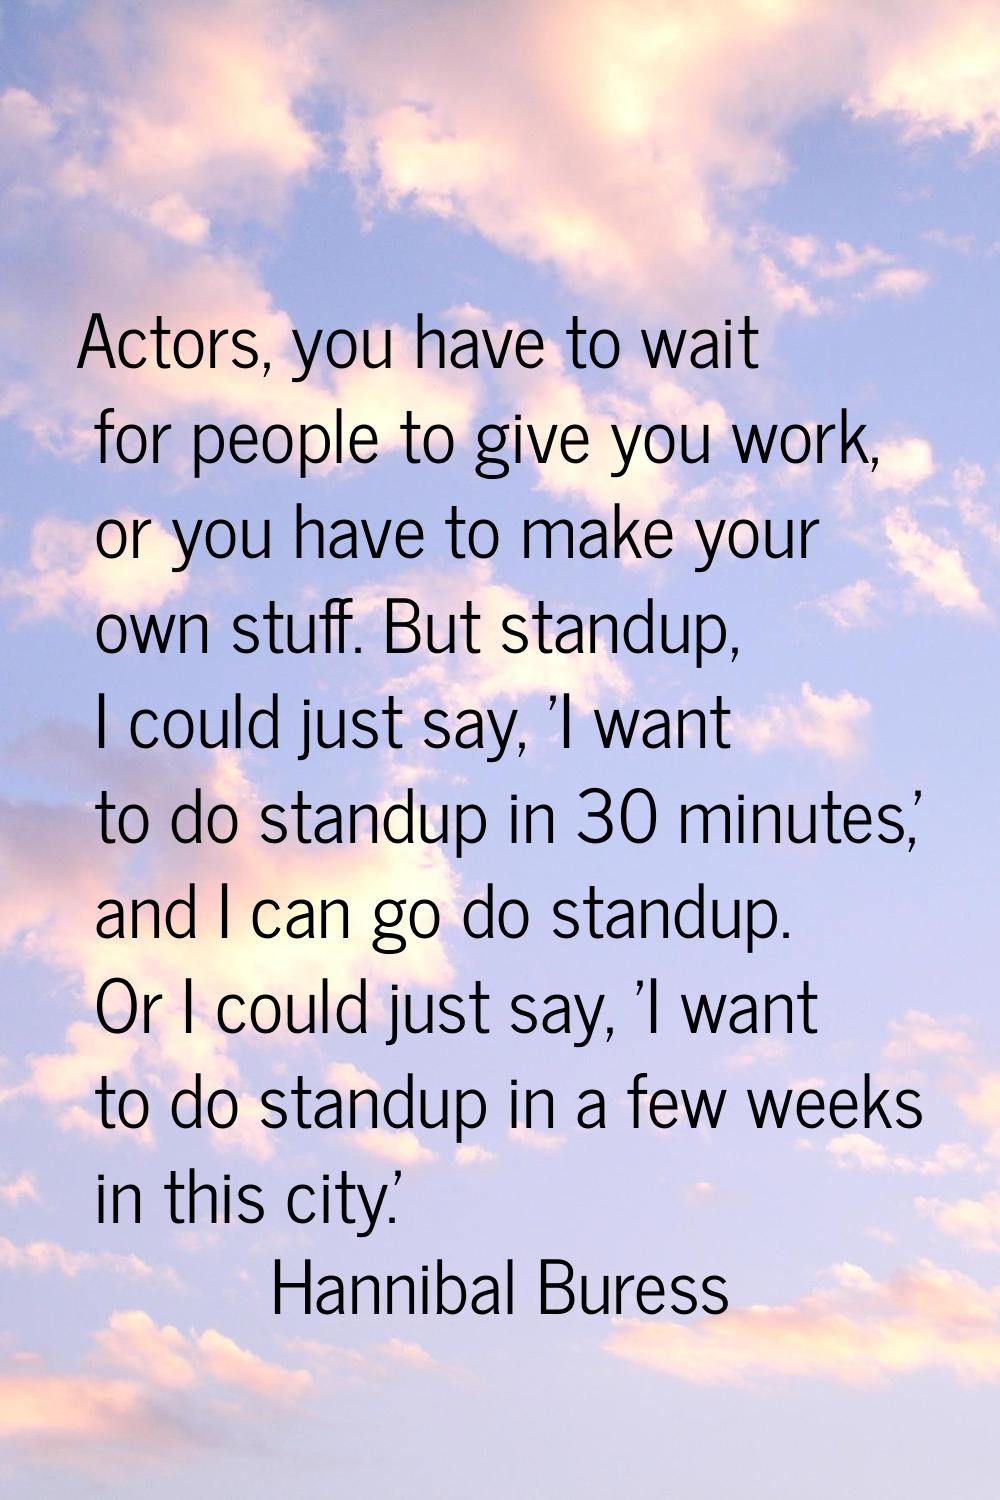 Actors, you have to wait for people to give you work, or you have to make your own stuff. But stand